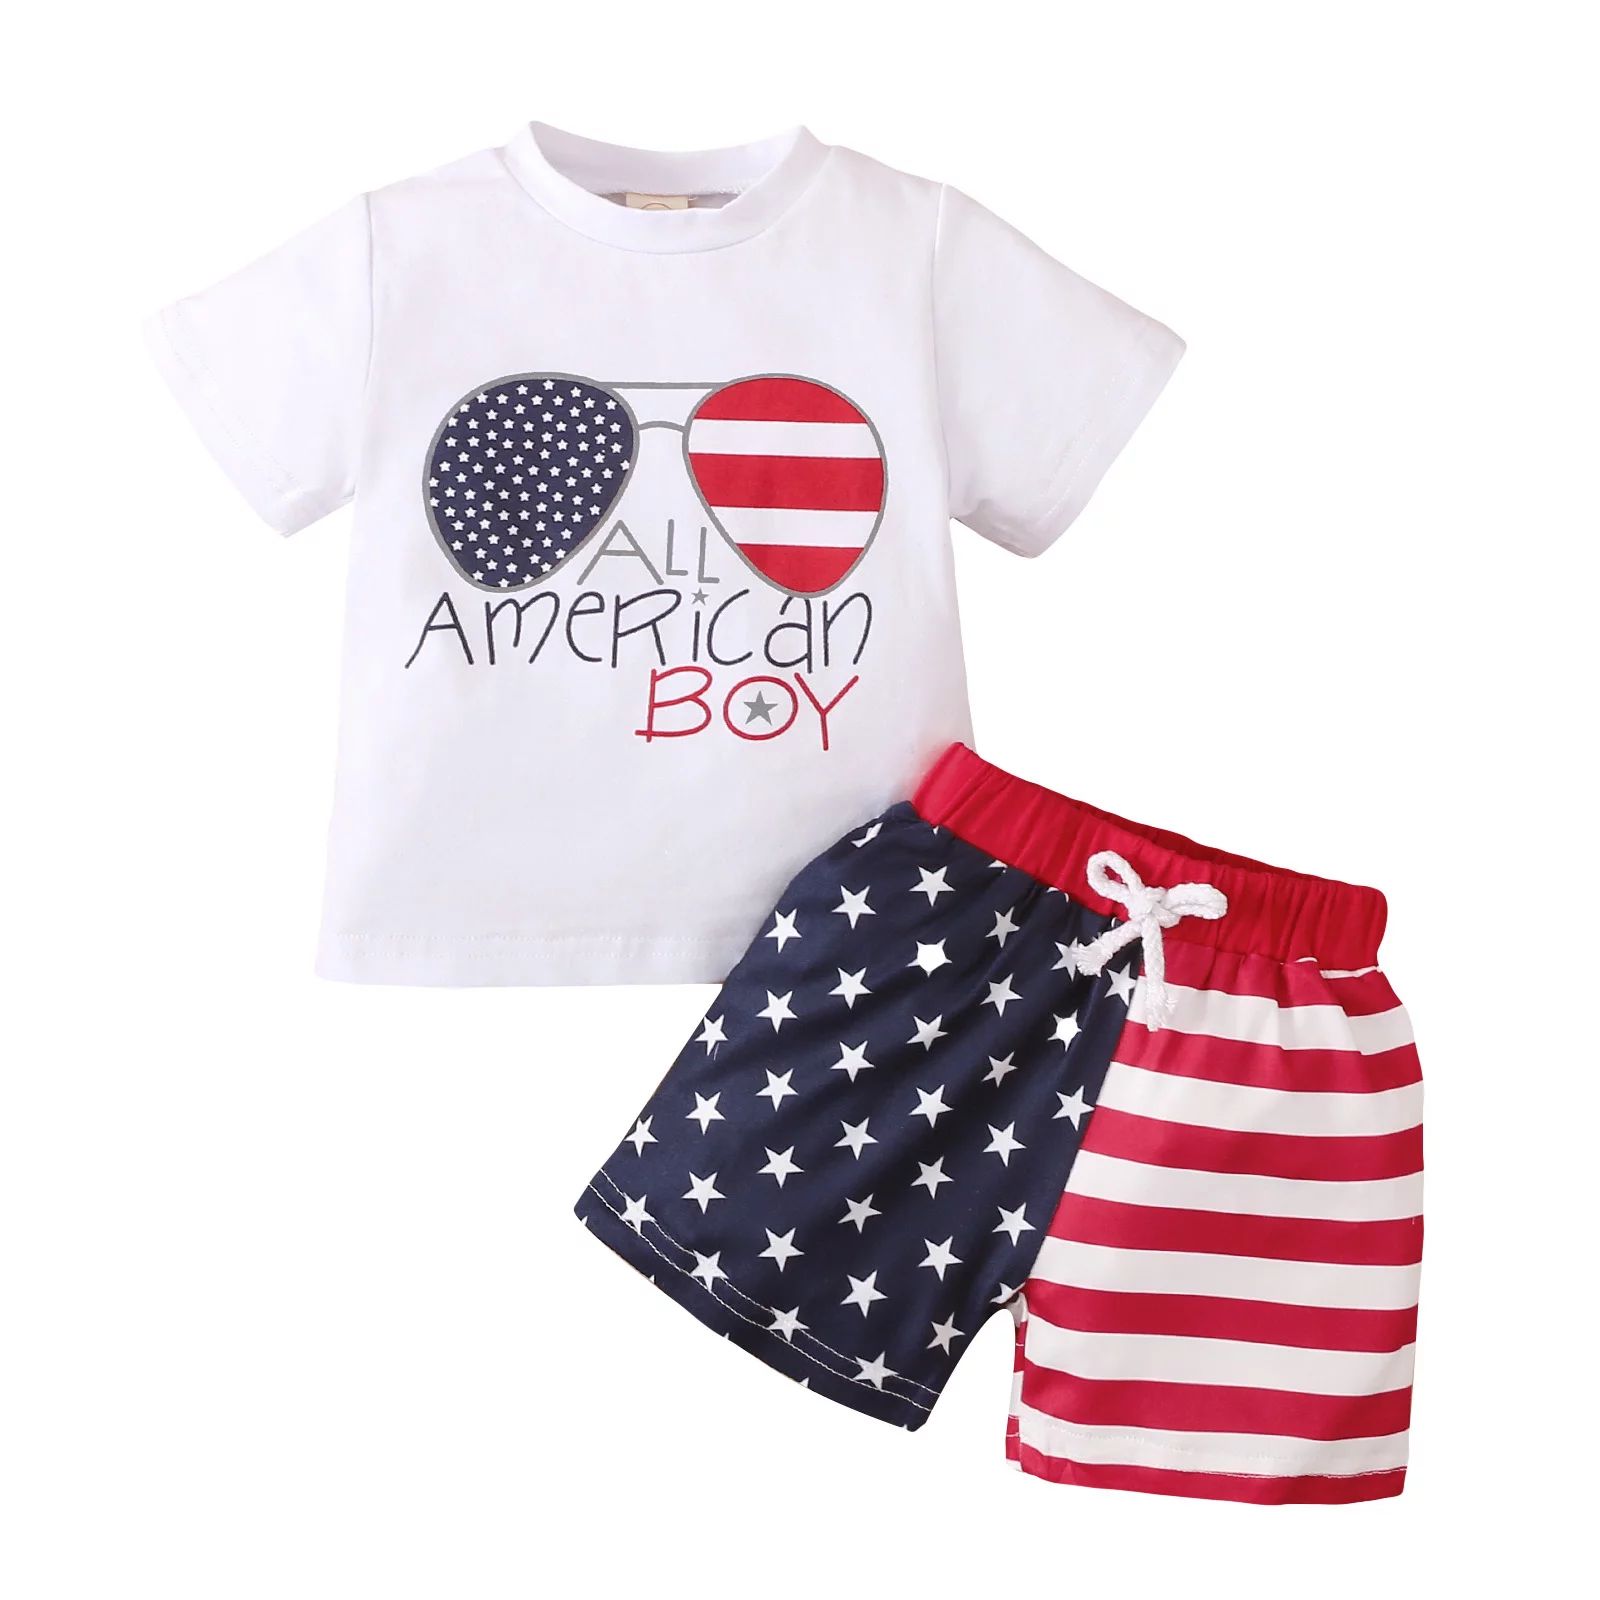 Tiqanon Baby Boys 4th of July Outfit American Flag T-Shirt Short Set, White, 0-3 Months | Walmart (US)